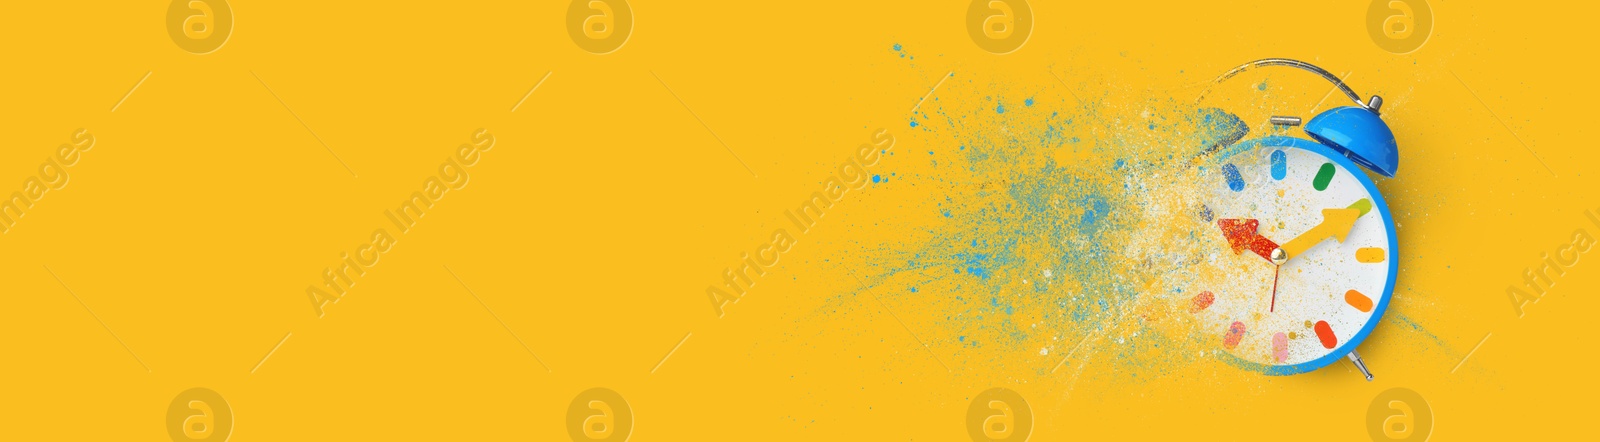 Image of Bright alarm clock dissolving on orange background, banner design with space for text. Flow of time